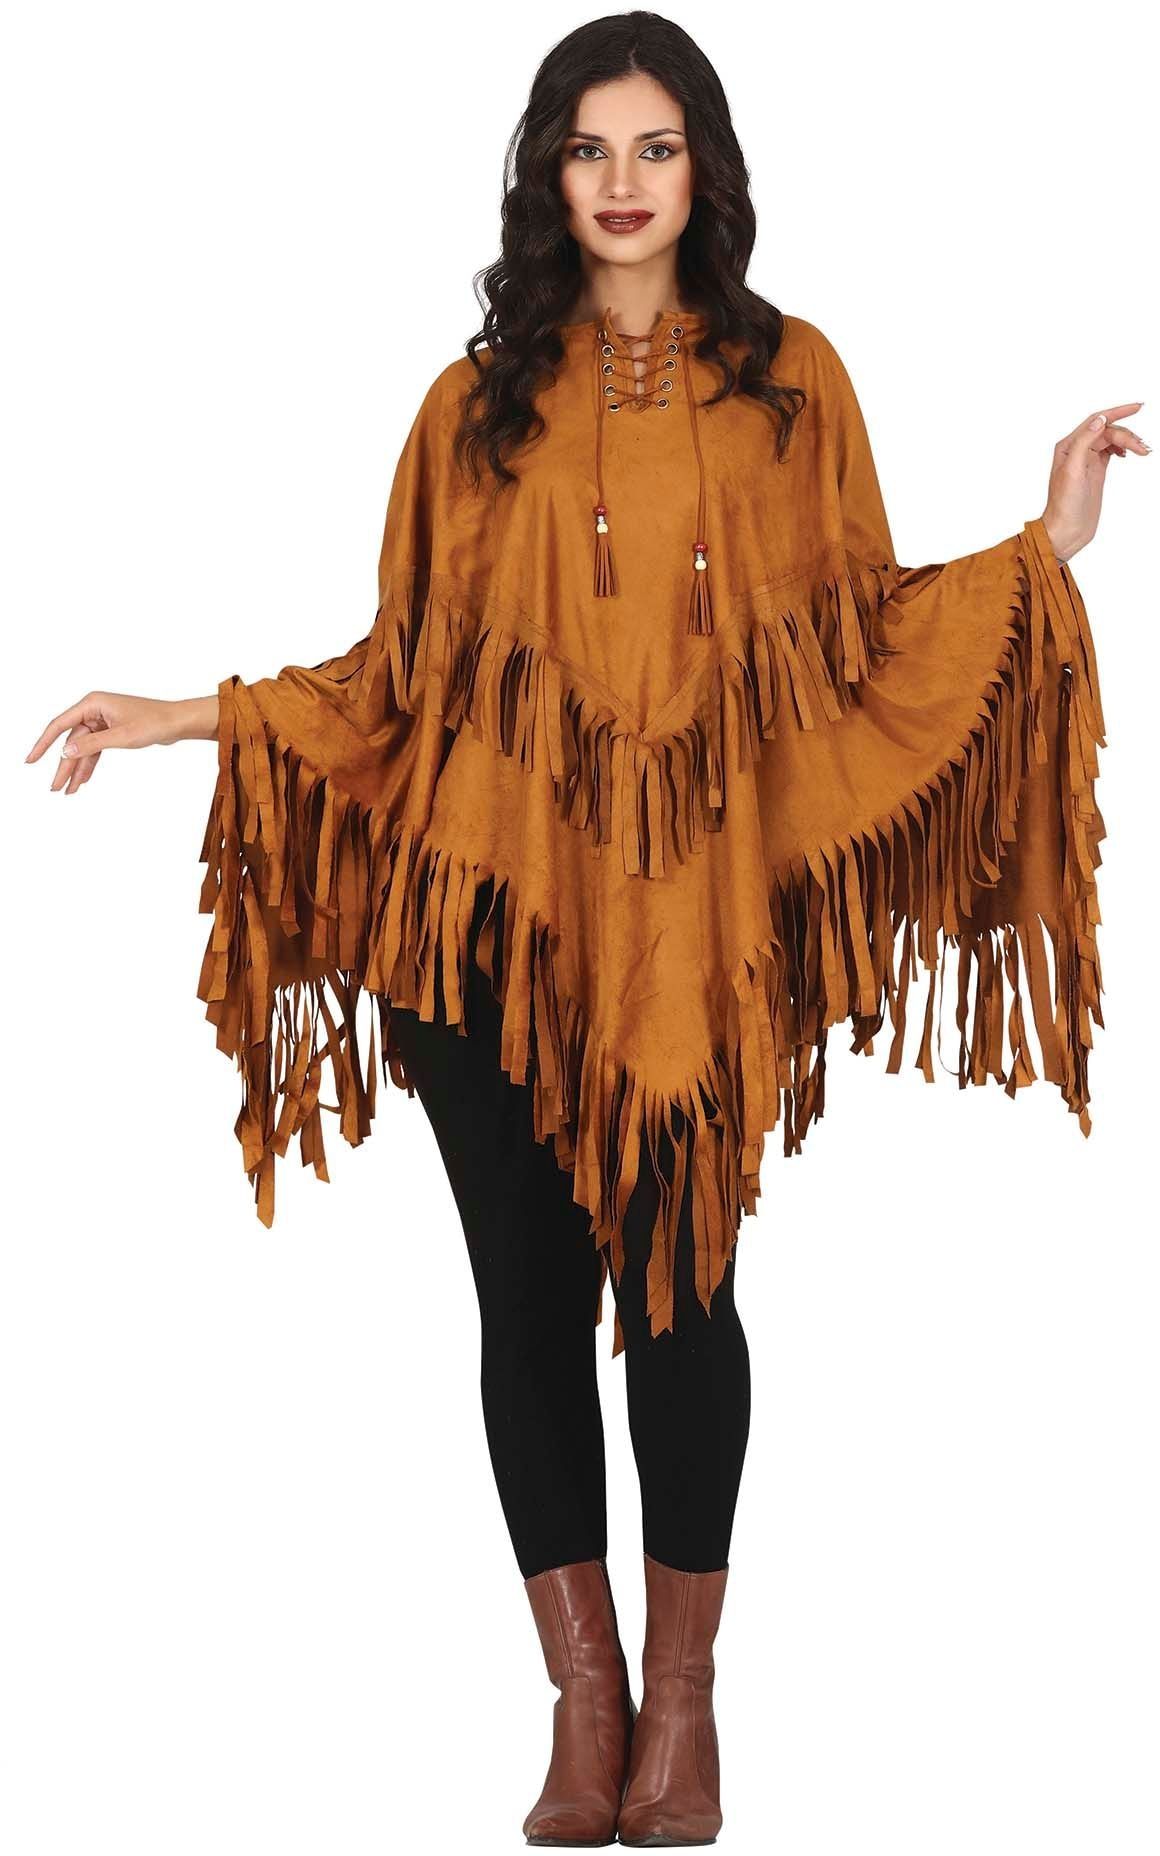 Indiaan poncho outfit unisex